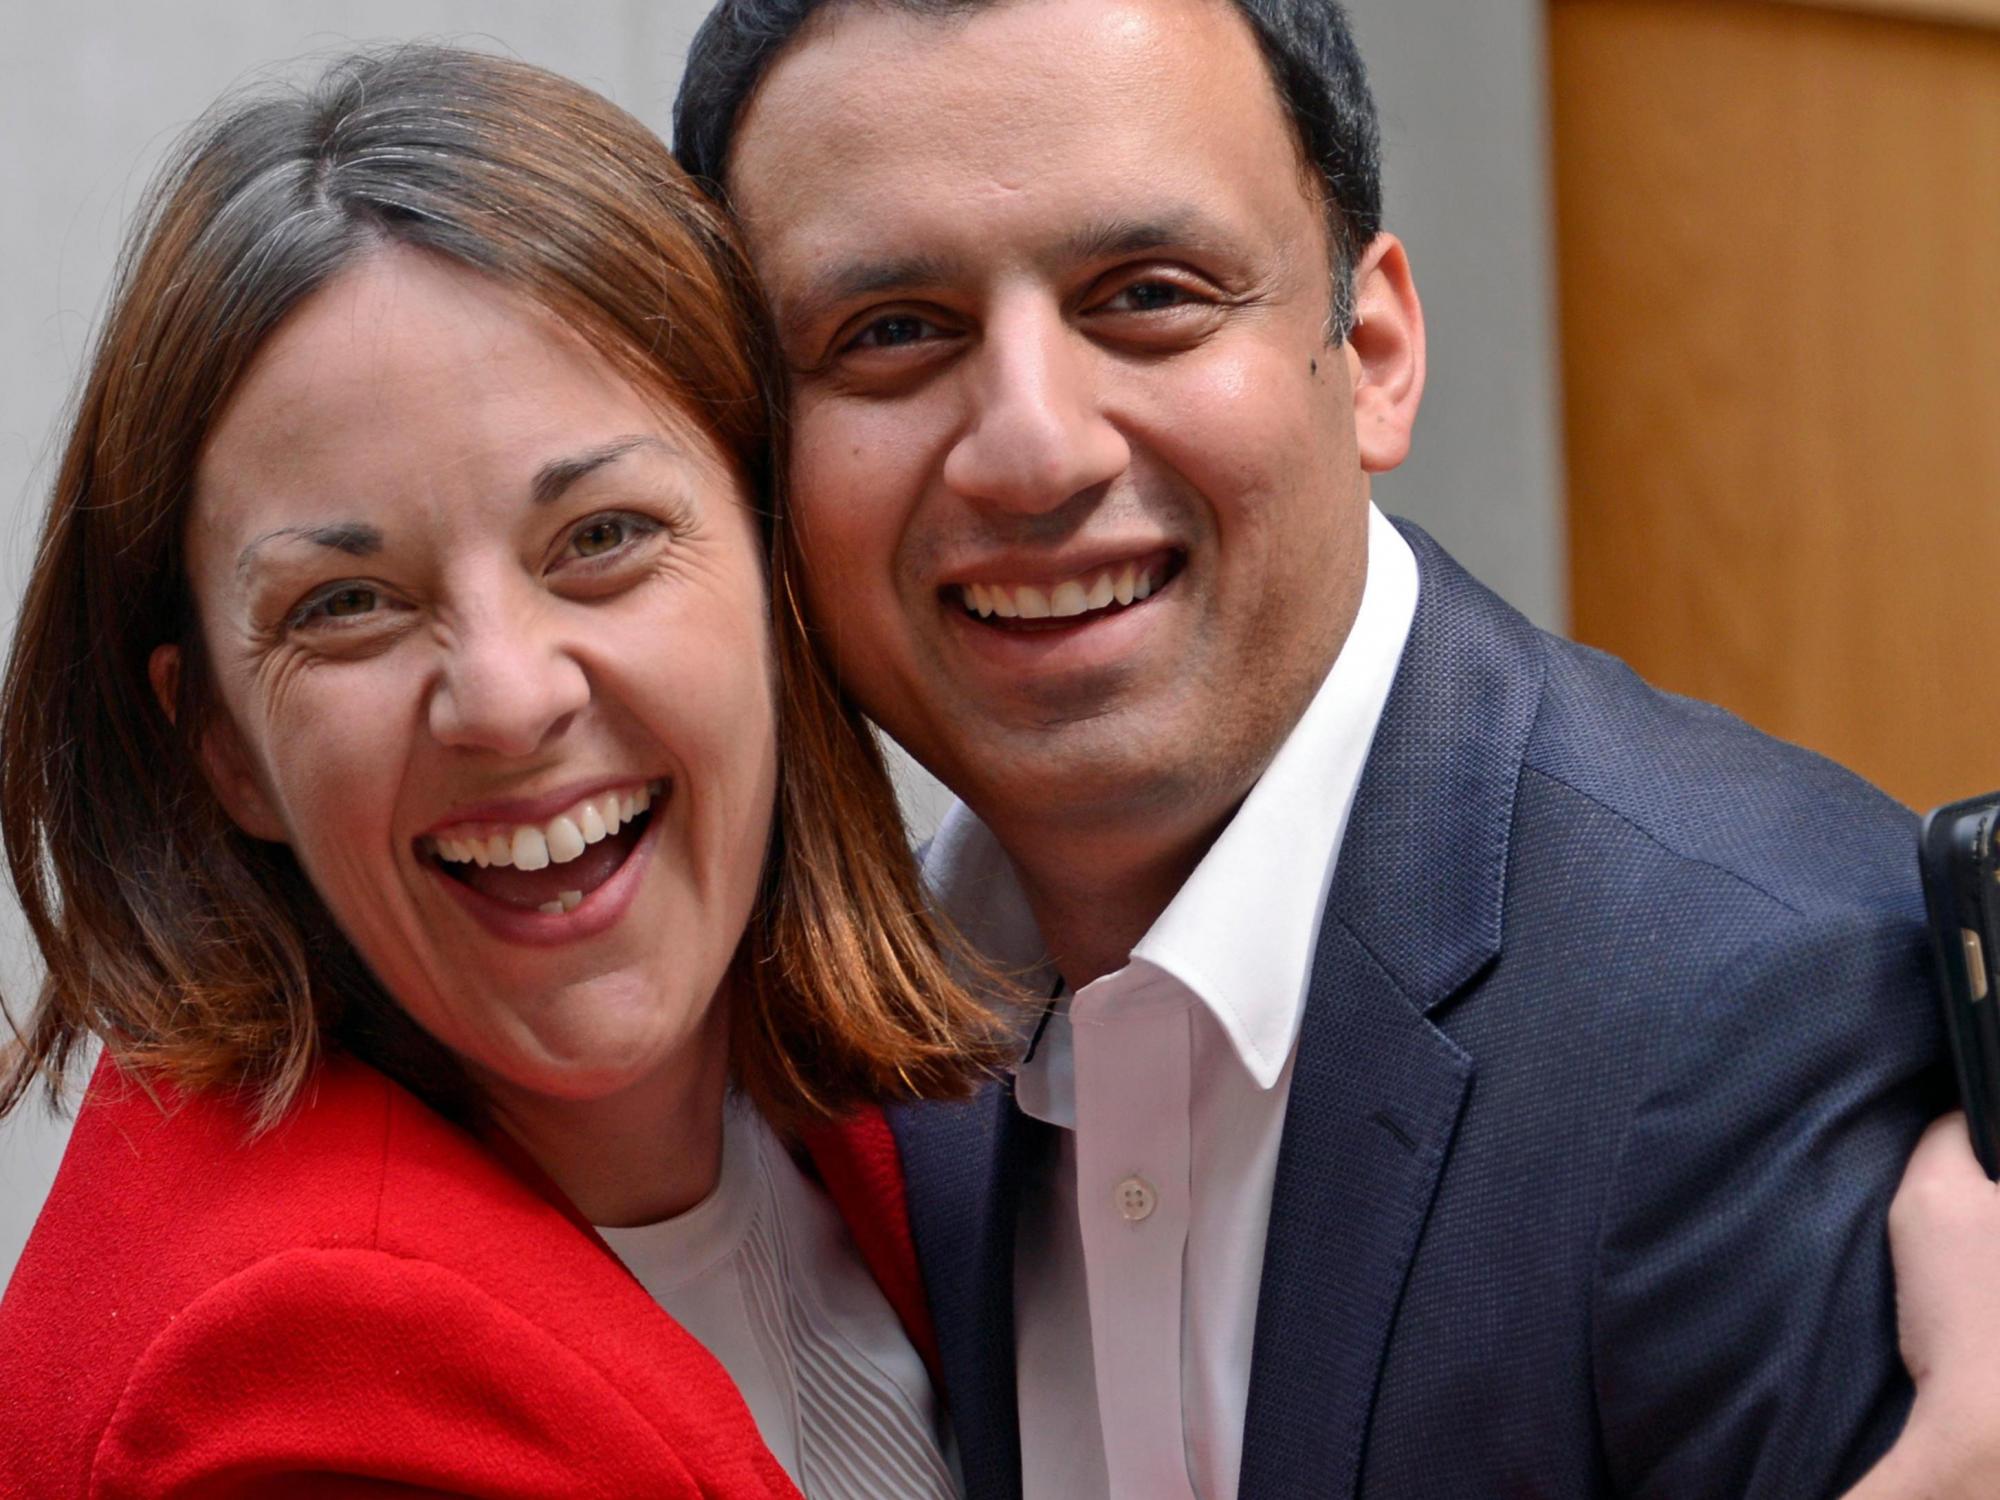 Both Kezia Dugdale, the former Scottish Labour leader, and Anas Sarwar, the former leadership candidate, are disillusioned with the party